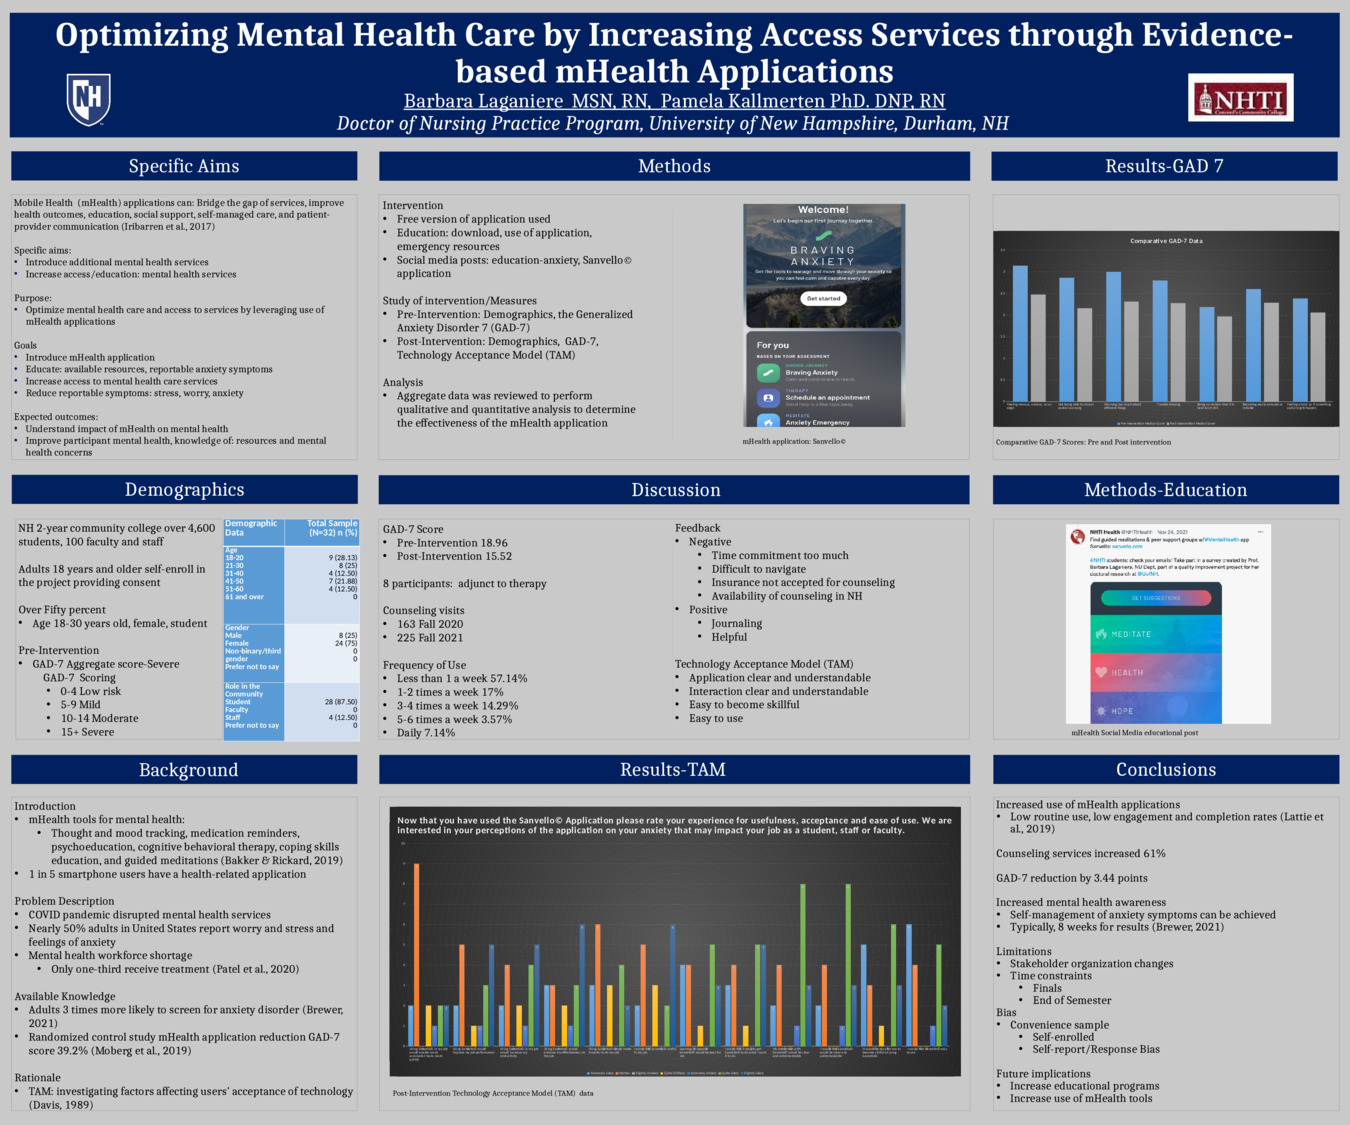 Optimizing Mental Health Care By Increasing Access Services Through Evidence-Based Mhealth Applications by bal1035